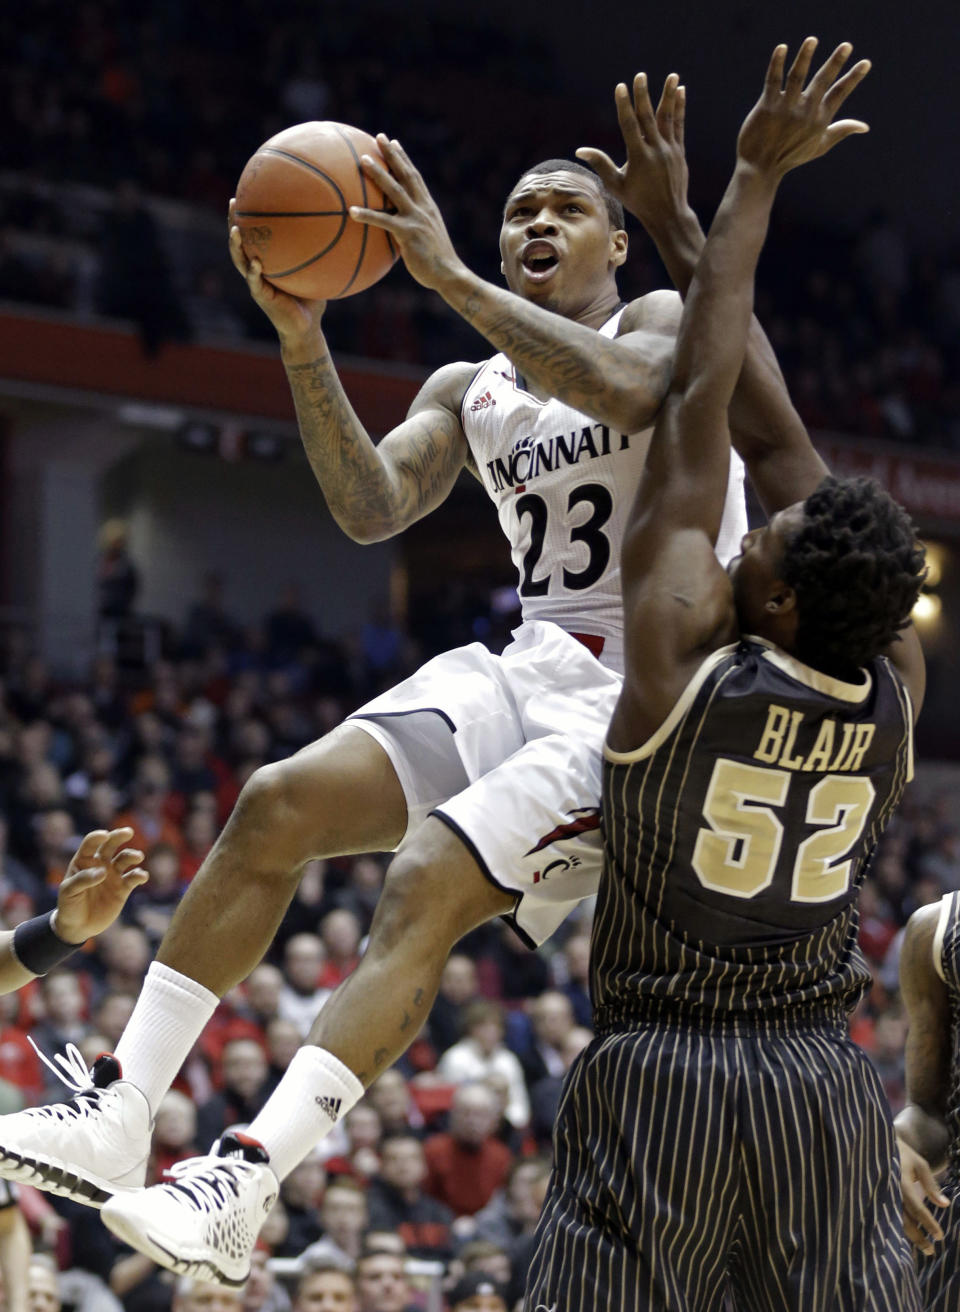 FILE - In this Jan. 23, 2014 file photo, Cincinnati guard Sean Kilpatrick (23) drives against Central Florida forward Staphon Blair (52) in the first half of an NCAA college basketball game in Cincinnati. Kilpatrick was selected to The Associated Press All-America team, released Monday, March 31, 2014. (AP Photo/Al Behrman)